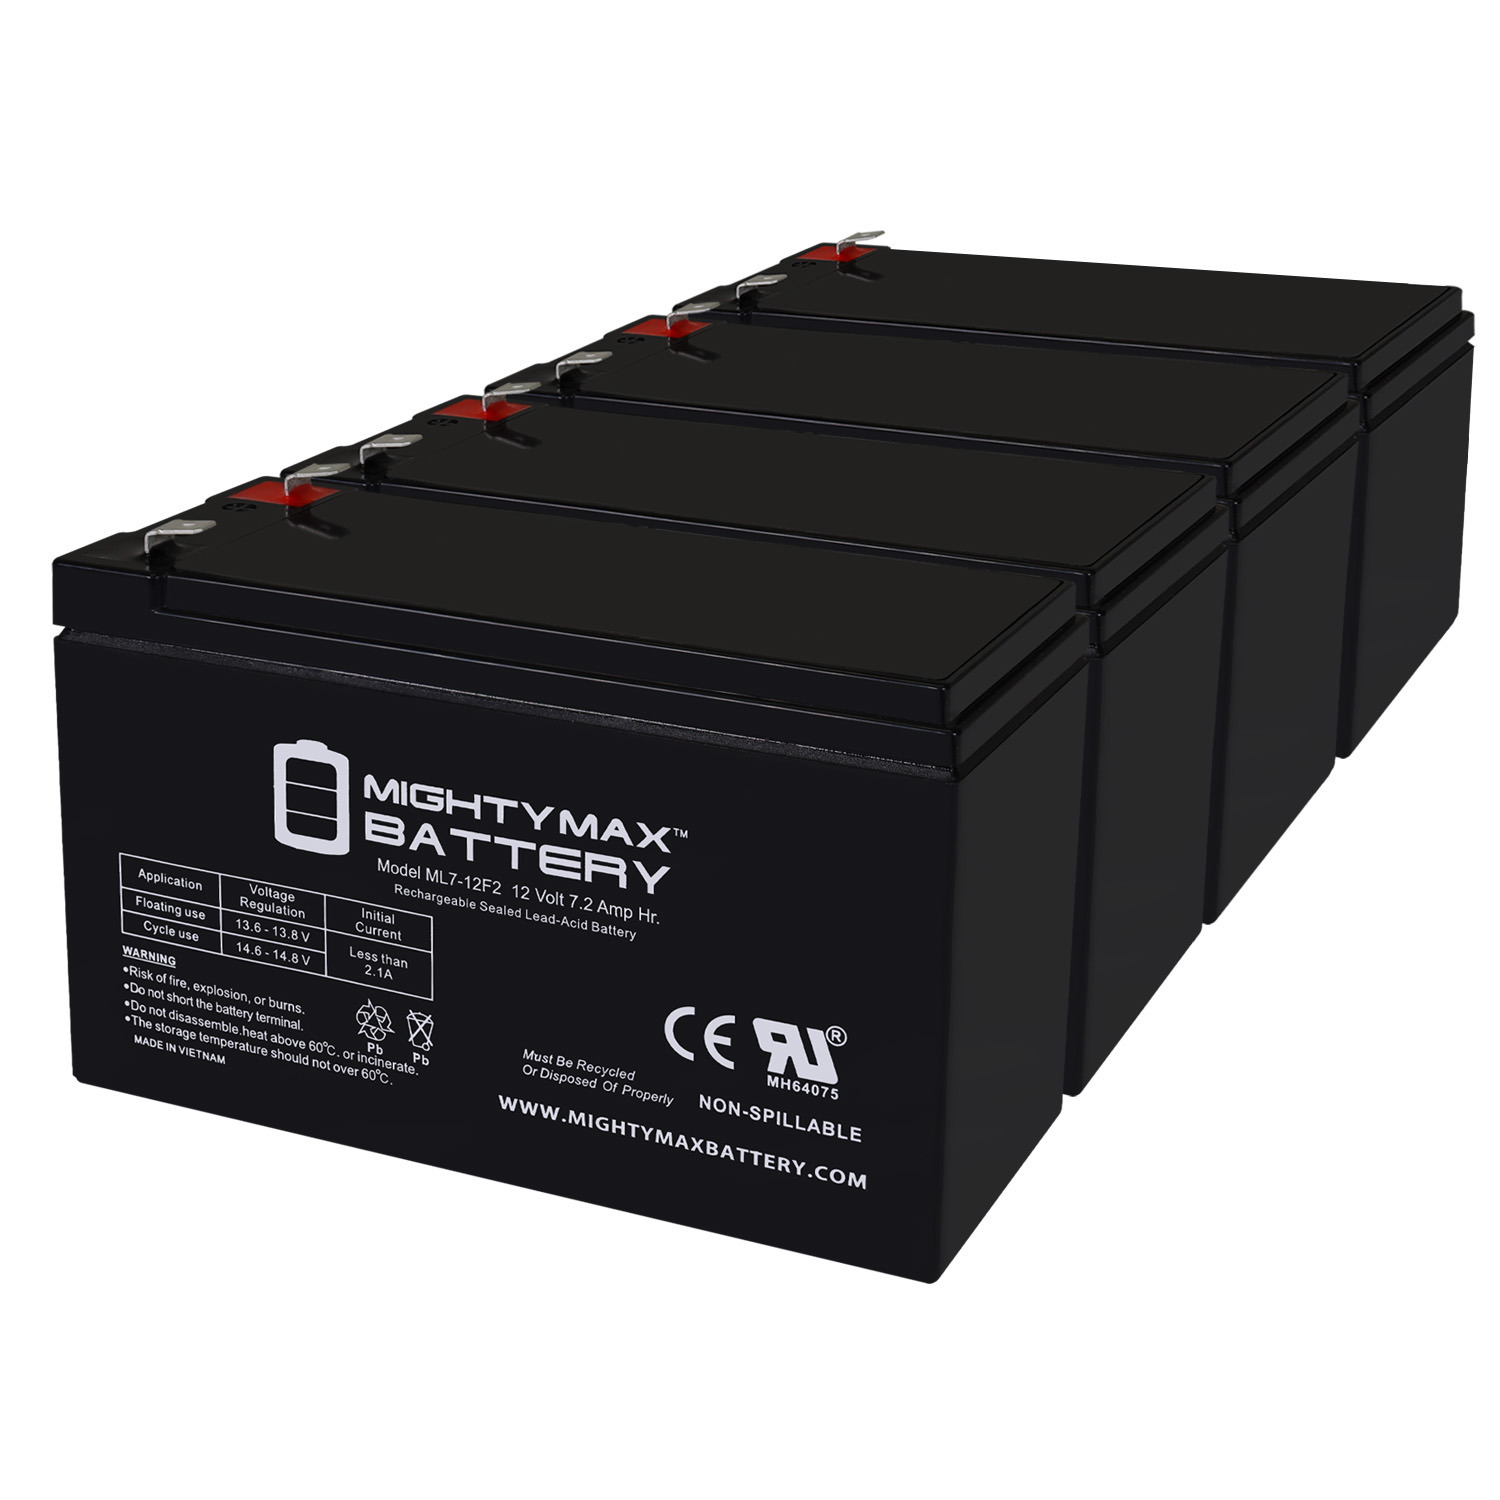 12V 7Ah F2 Replacement Battery for CyberPower AVR 800VA UPS - 4 Pack